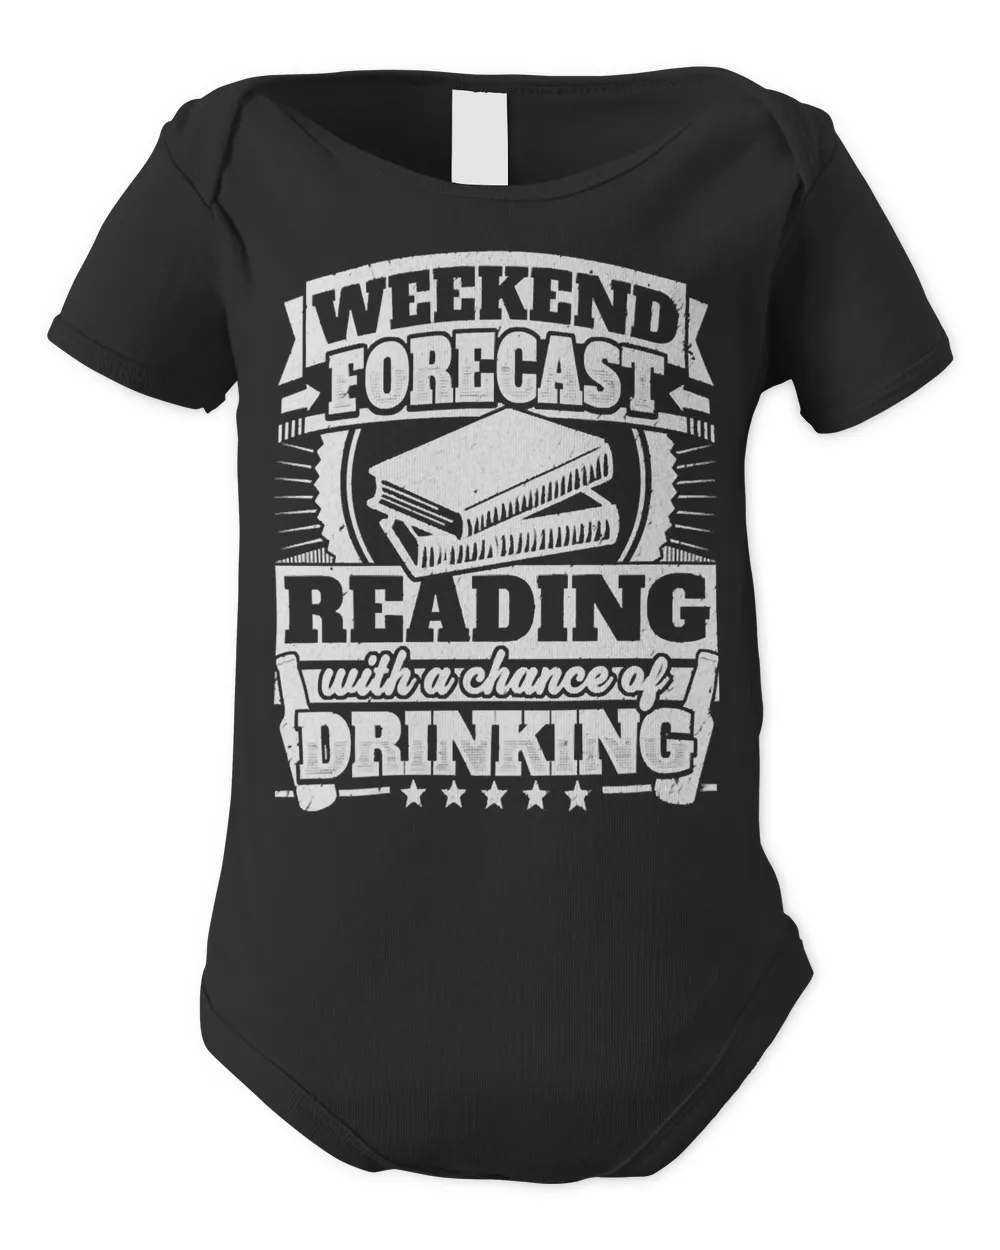 Weekend Forecast Reading Drinking Tee 446 Book Reader